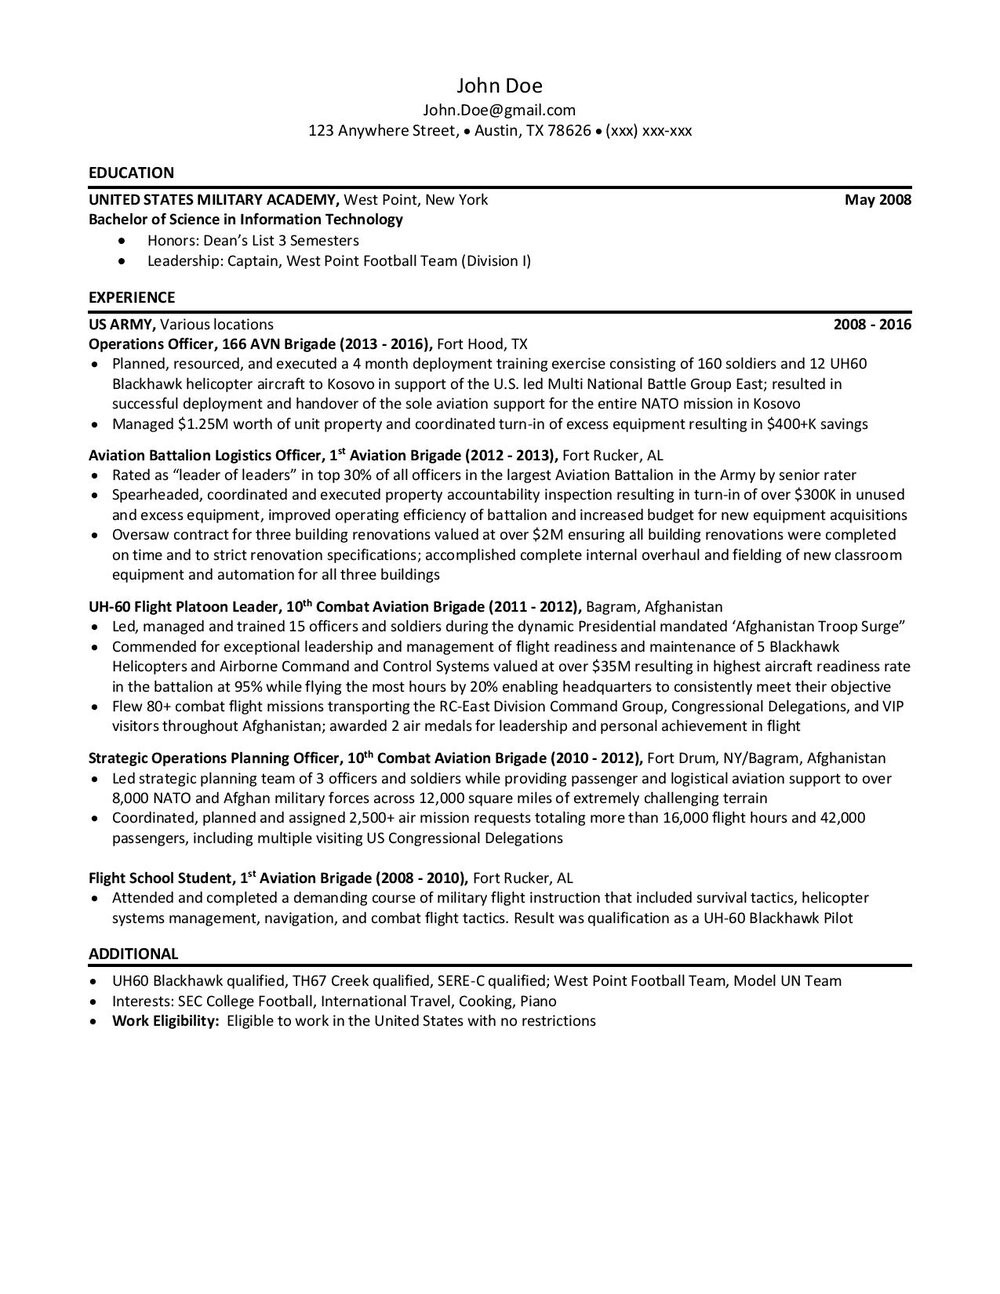 Resume Sample for the Air force Military to Civilian Resume Guide â Post Military Career Options